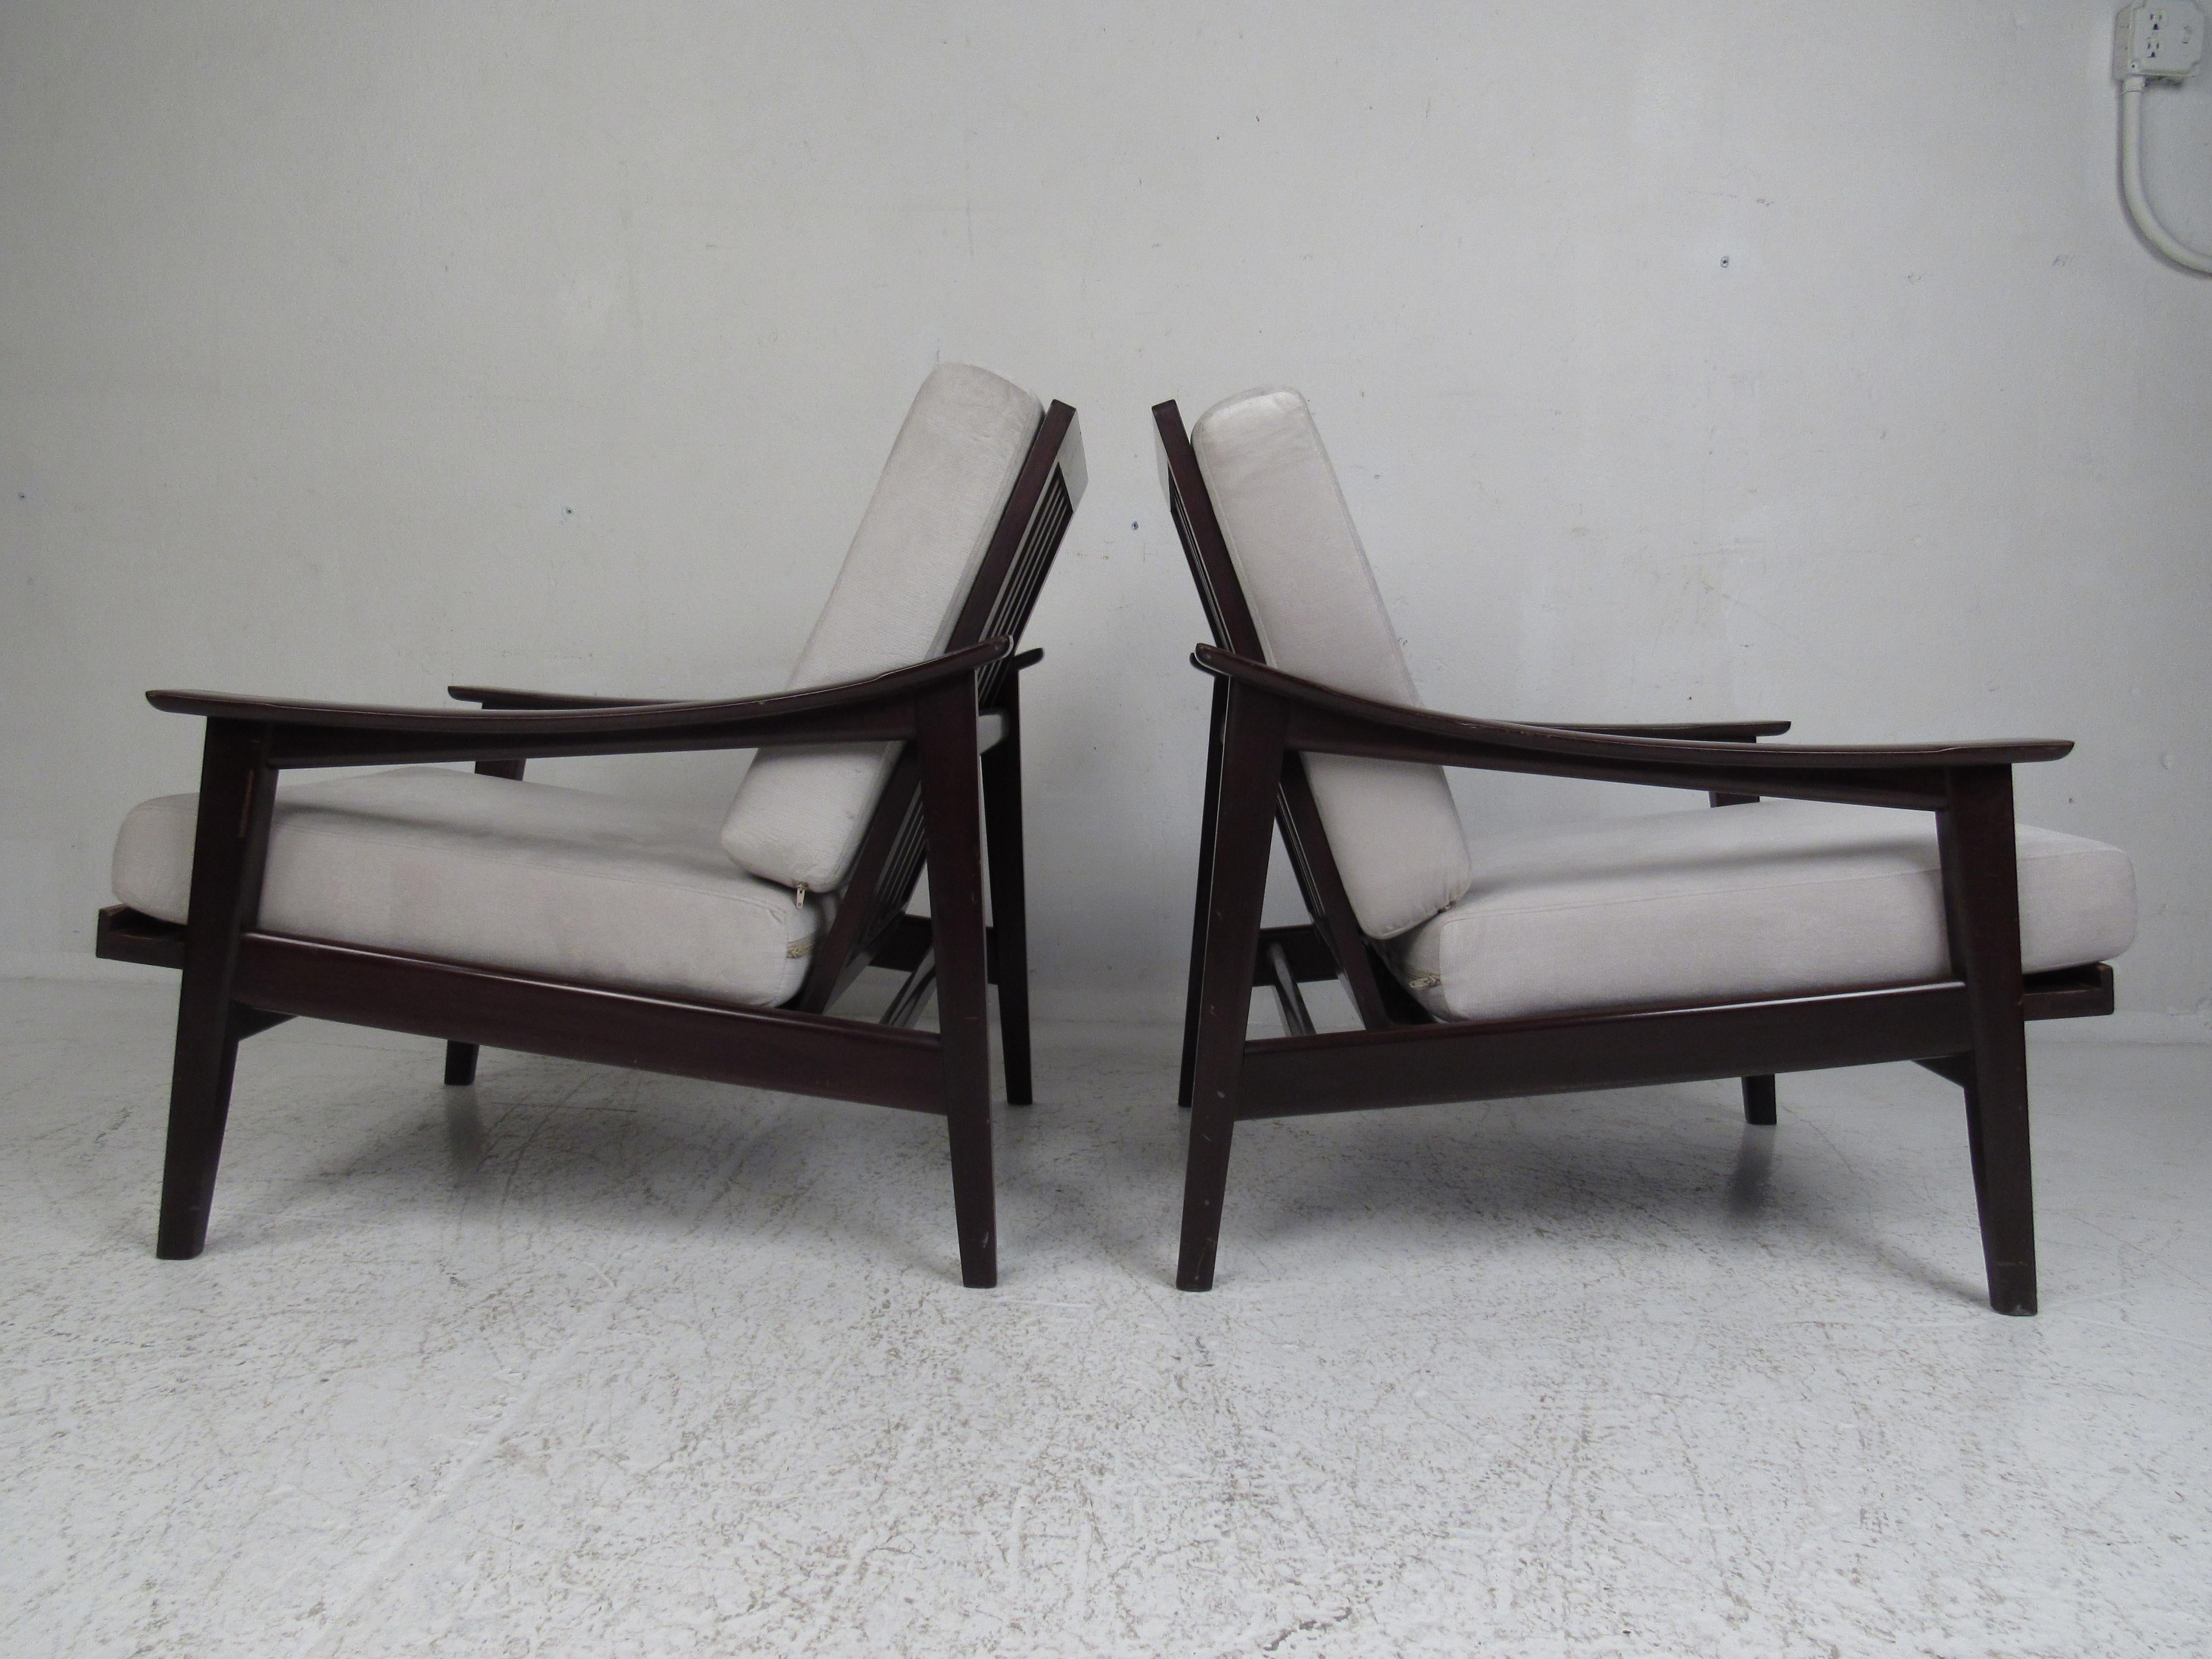 Pair of Vintage Italian Modern Reclining Lounge Chairs In Good Condition For Sale In Brooklyn, NY